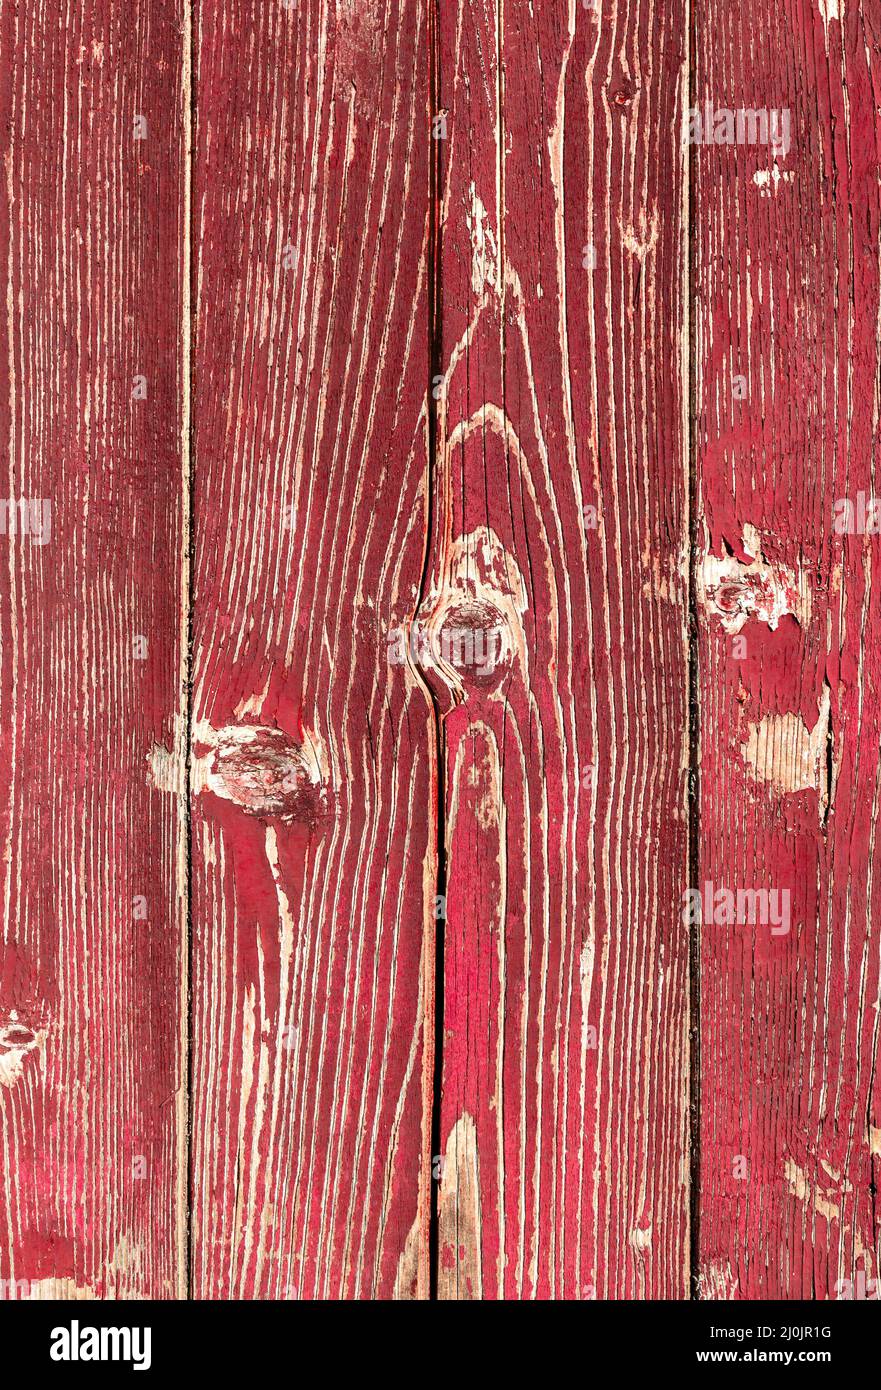 Wooden planks with peeling paint Stock Photo